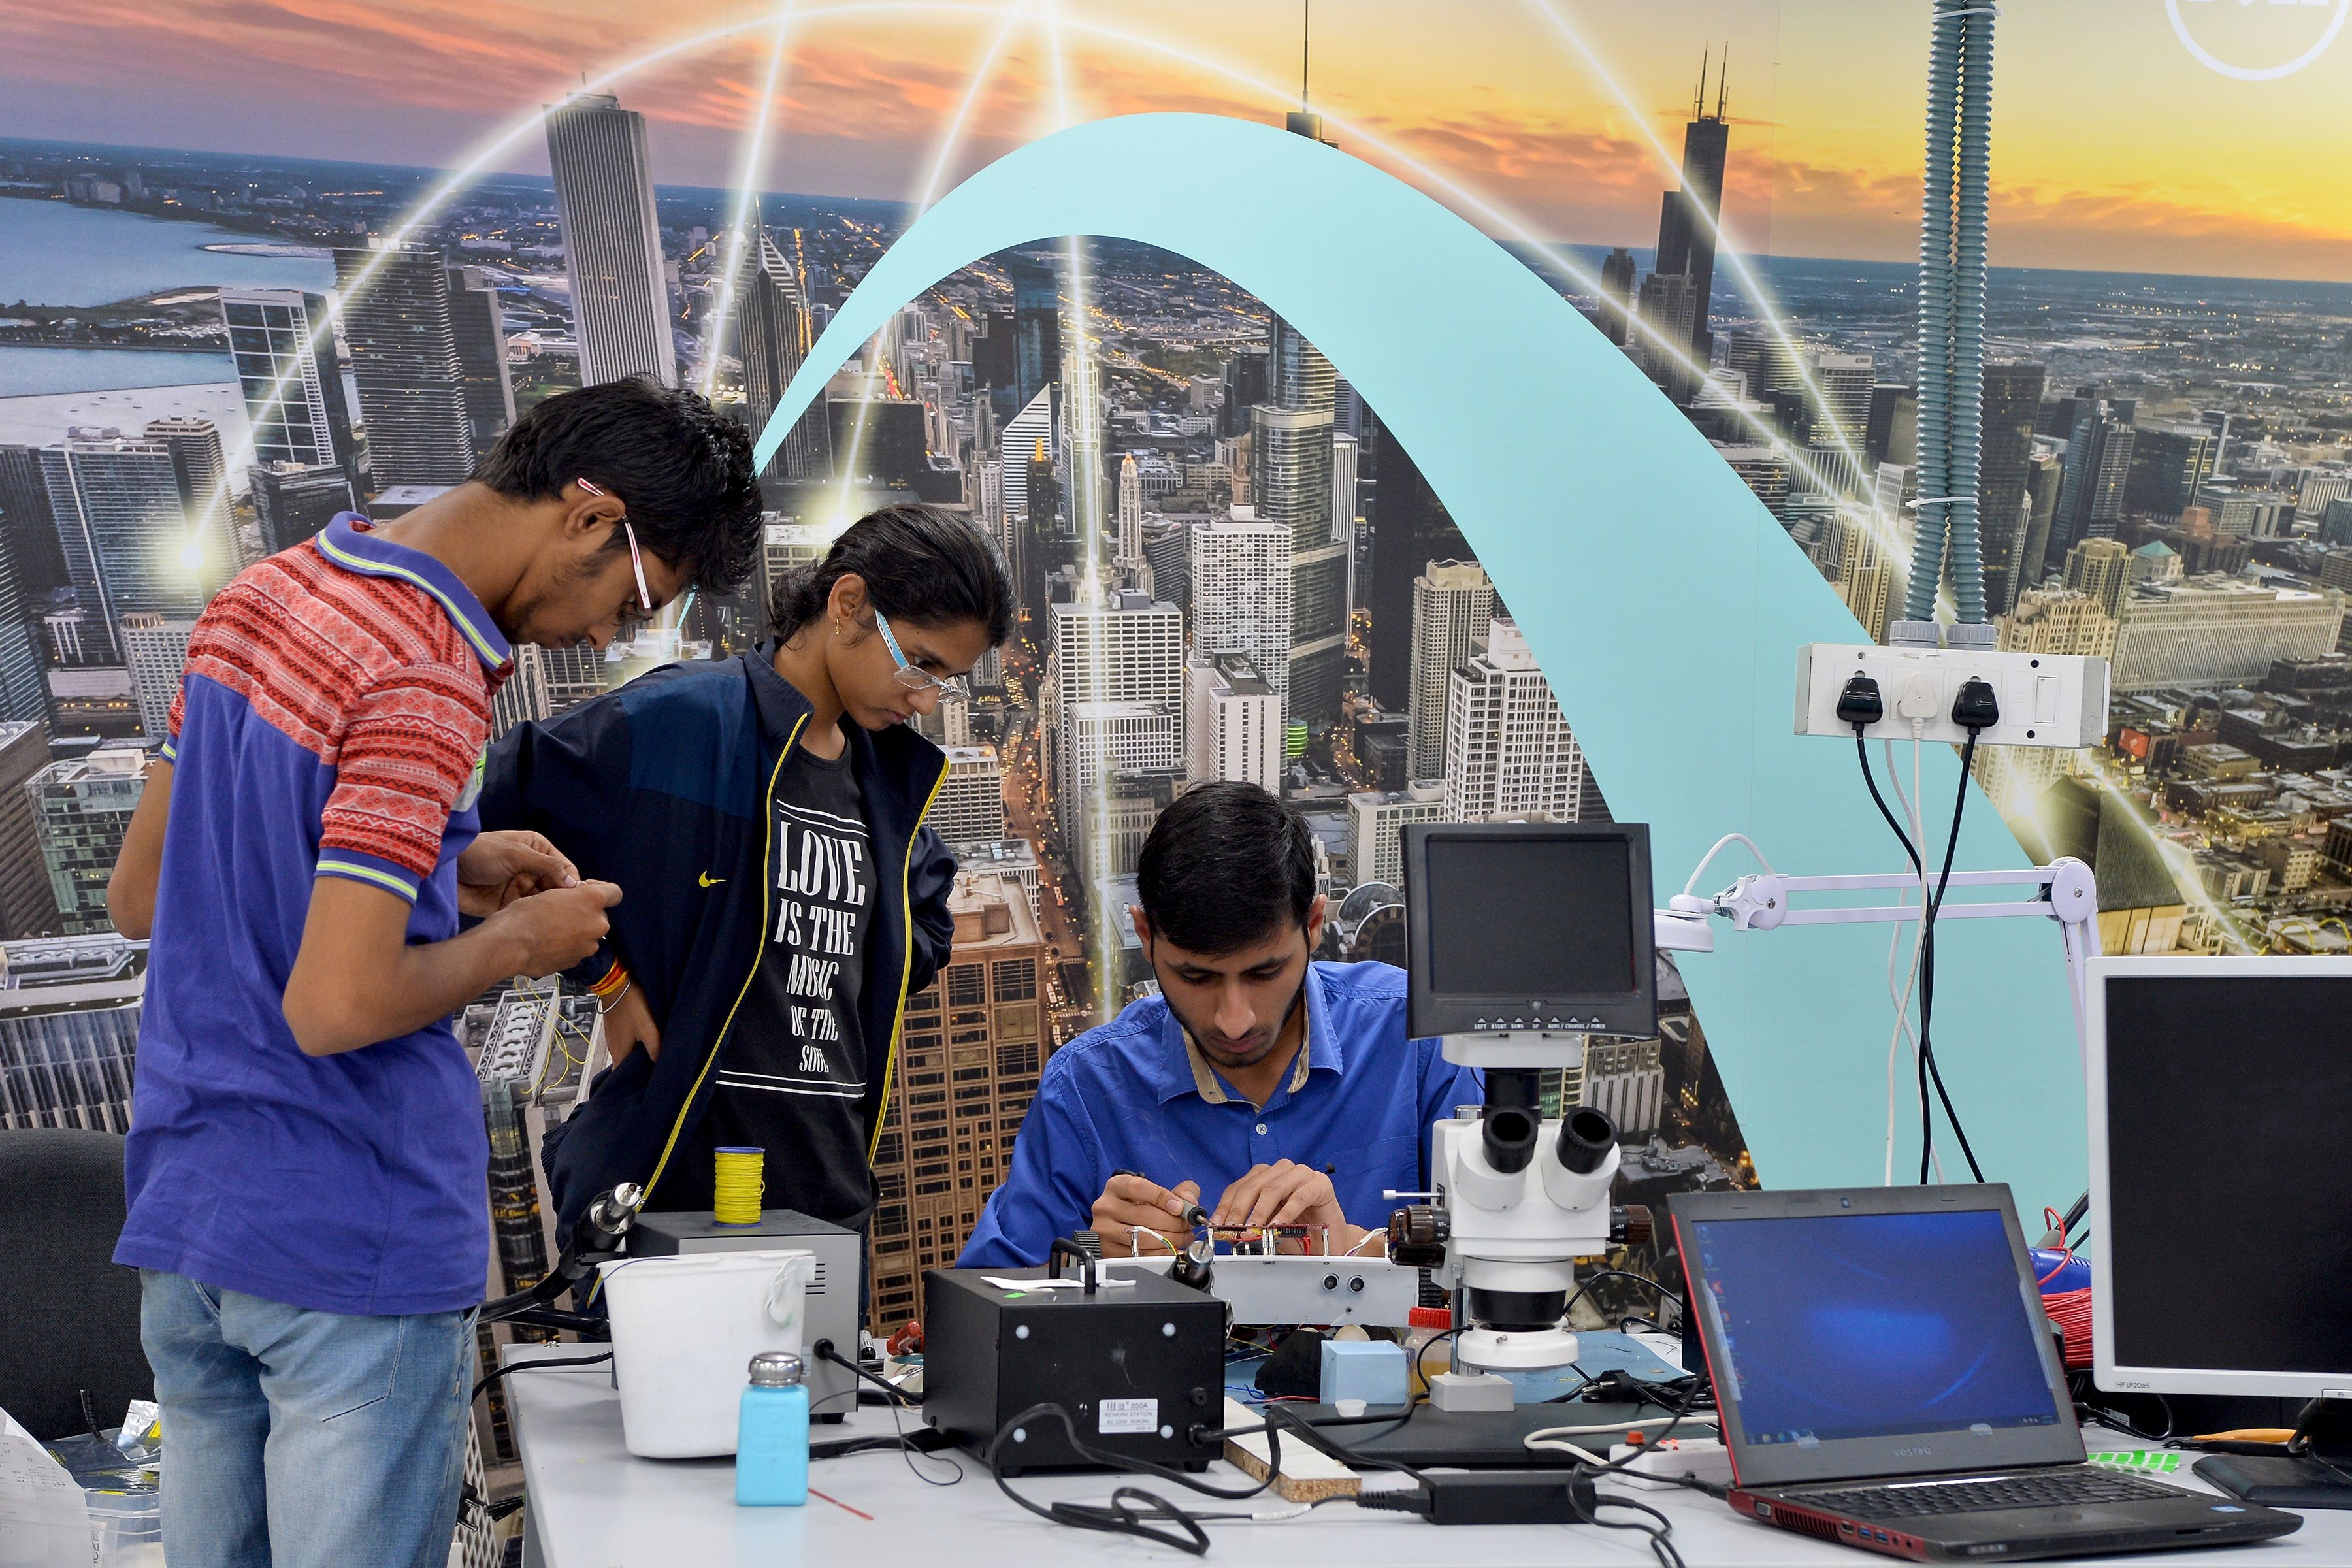 In the basement of a Bangalore building, young Indians dream of becoming the next Steve Jobs or Mark Zuckerberg in the risky world of tech start-ups. Photo: AFP